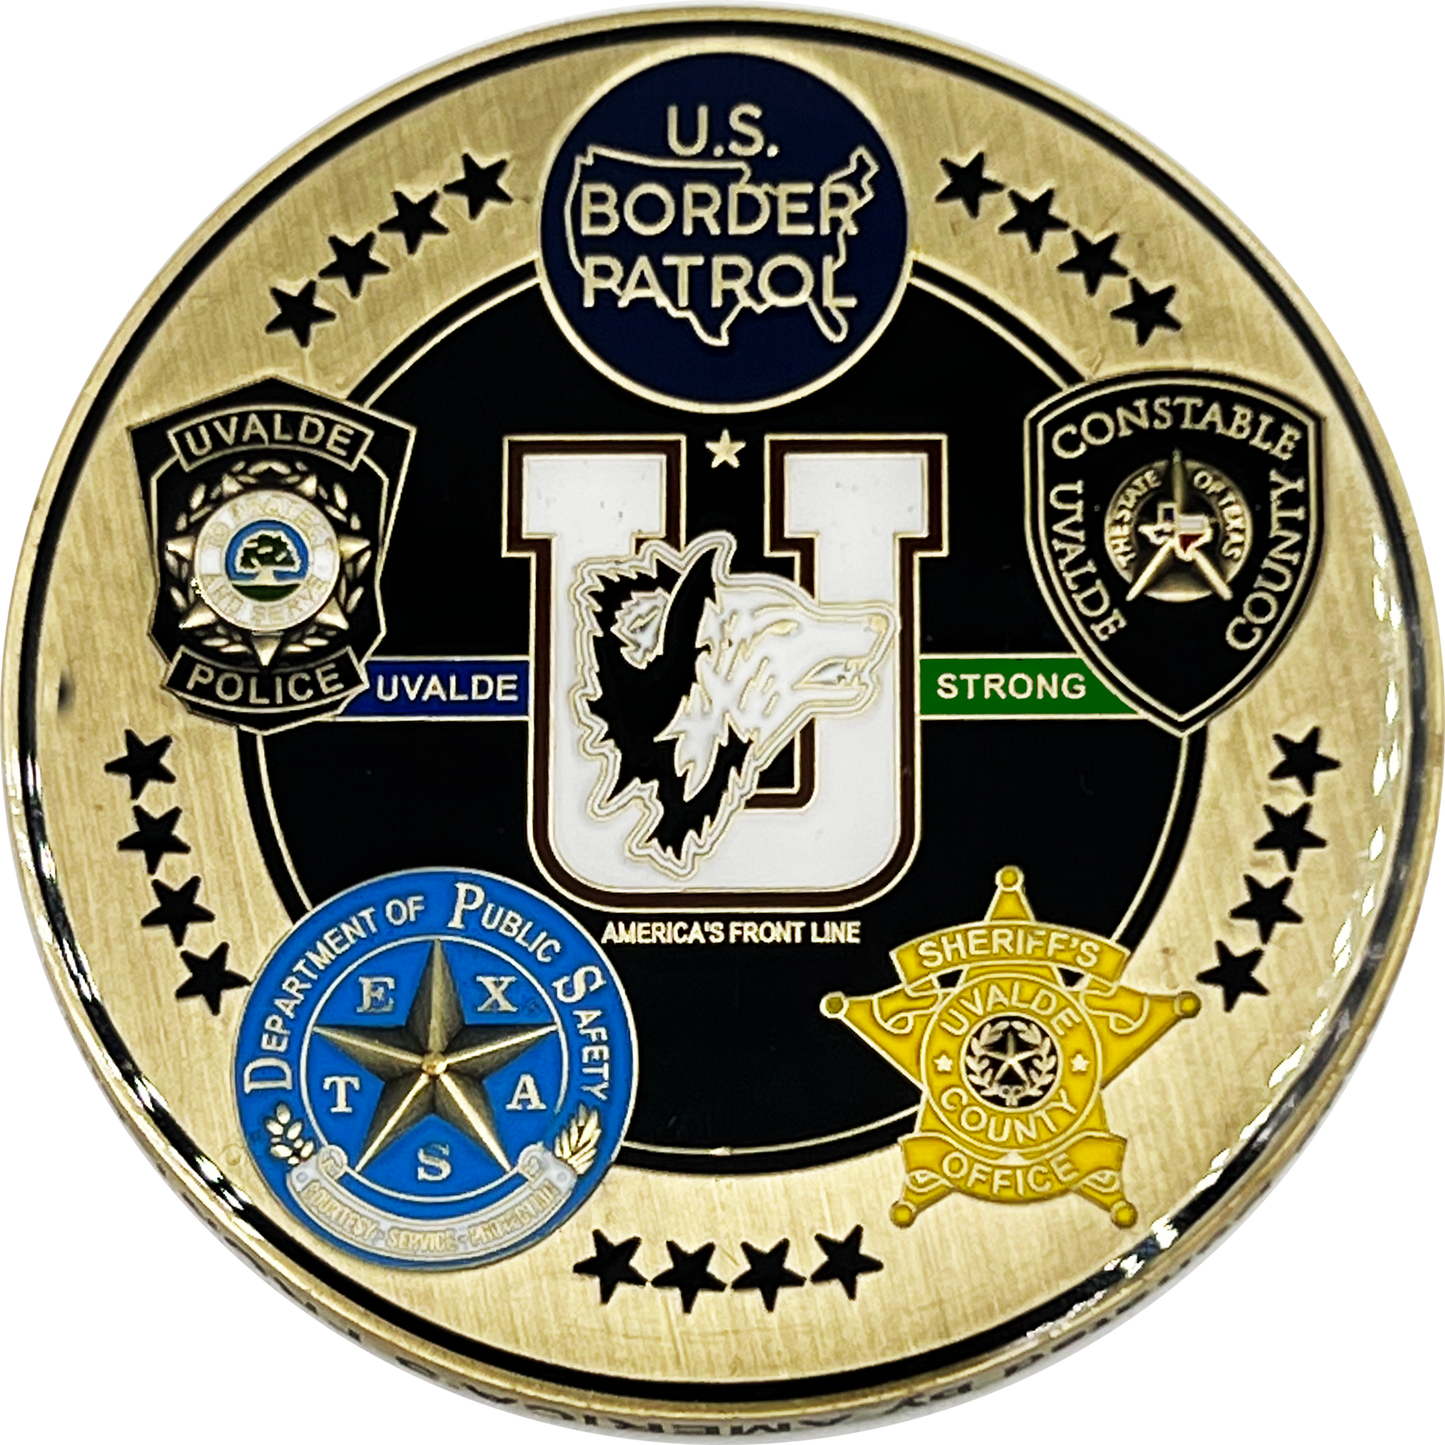 BL1-06 Uvalde Texas Challenge Coin Police Constable Border Patrol Department of Public Safety Sheriff